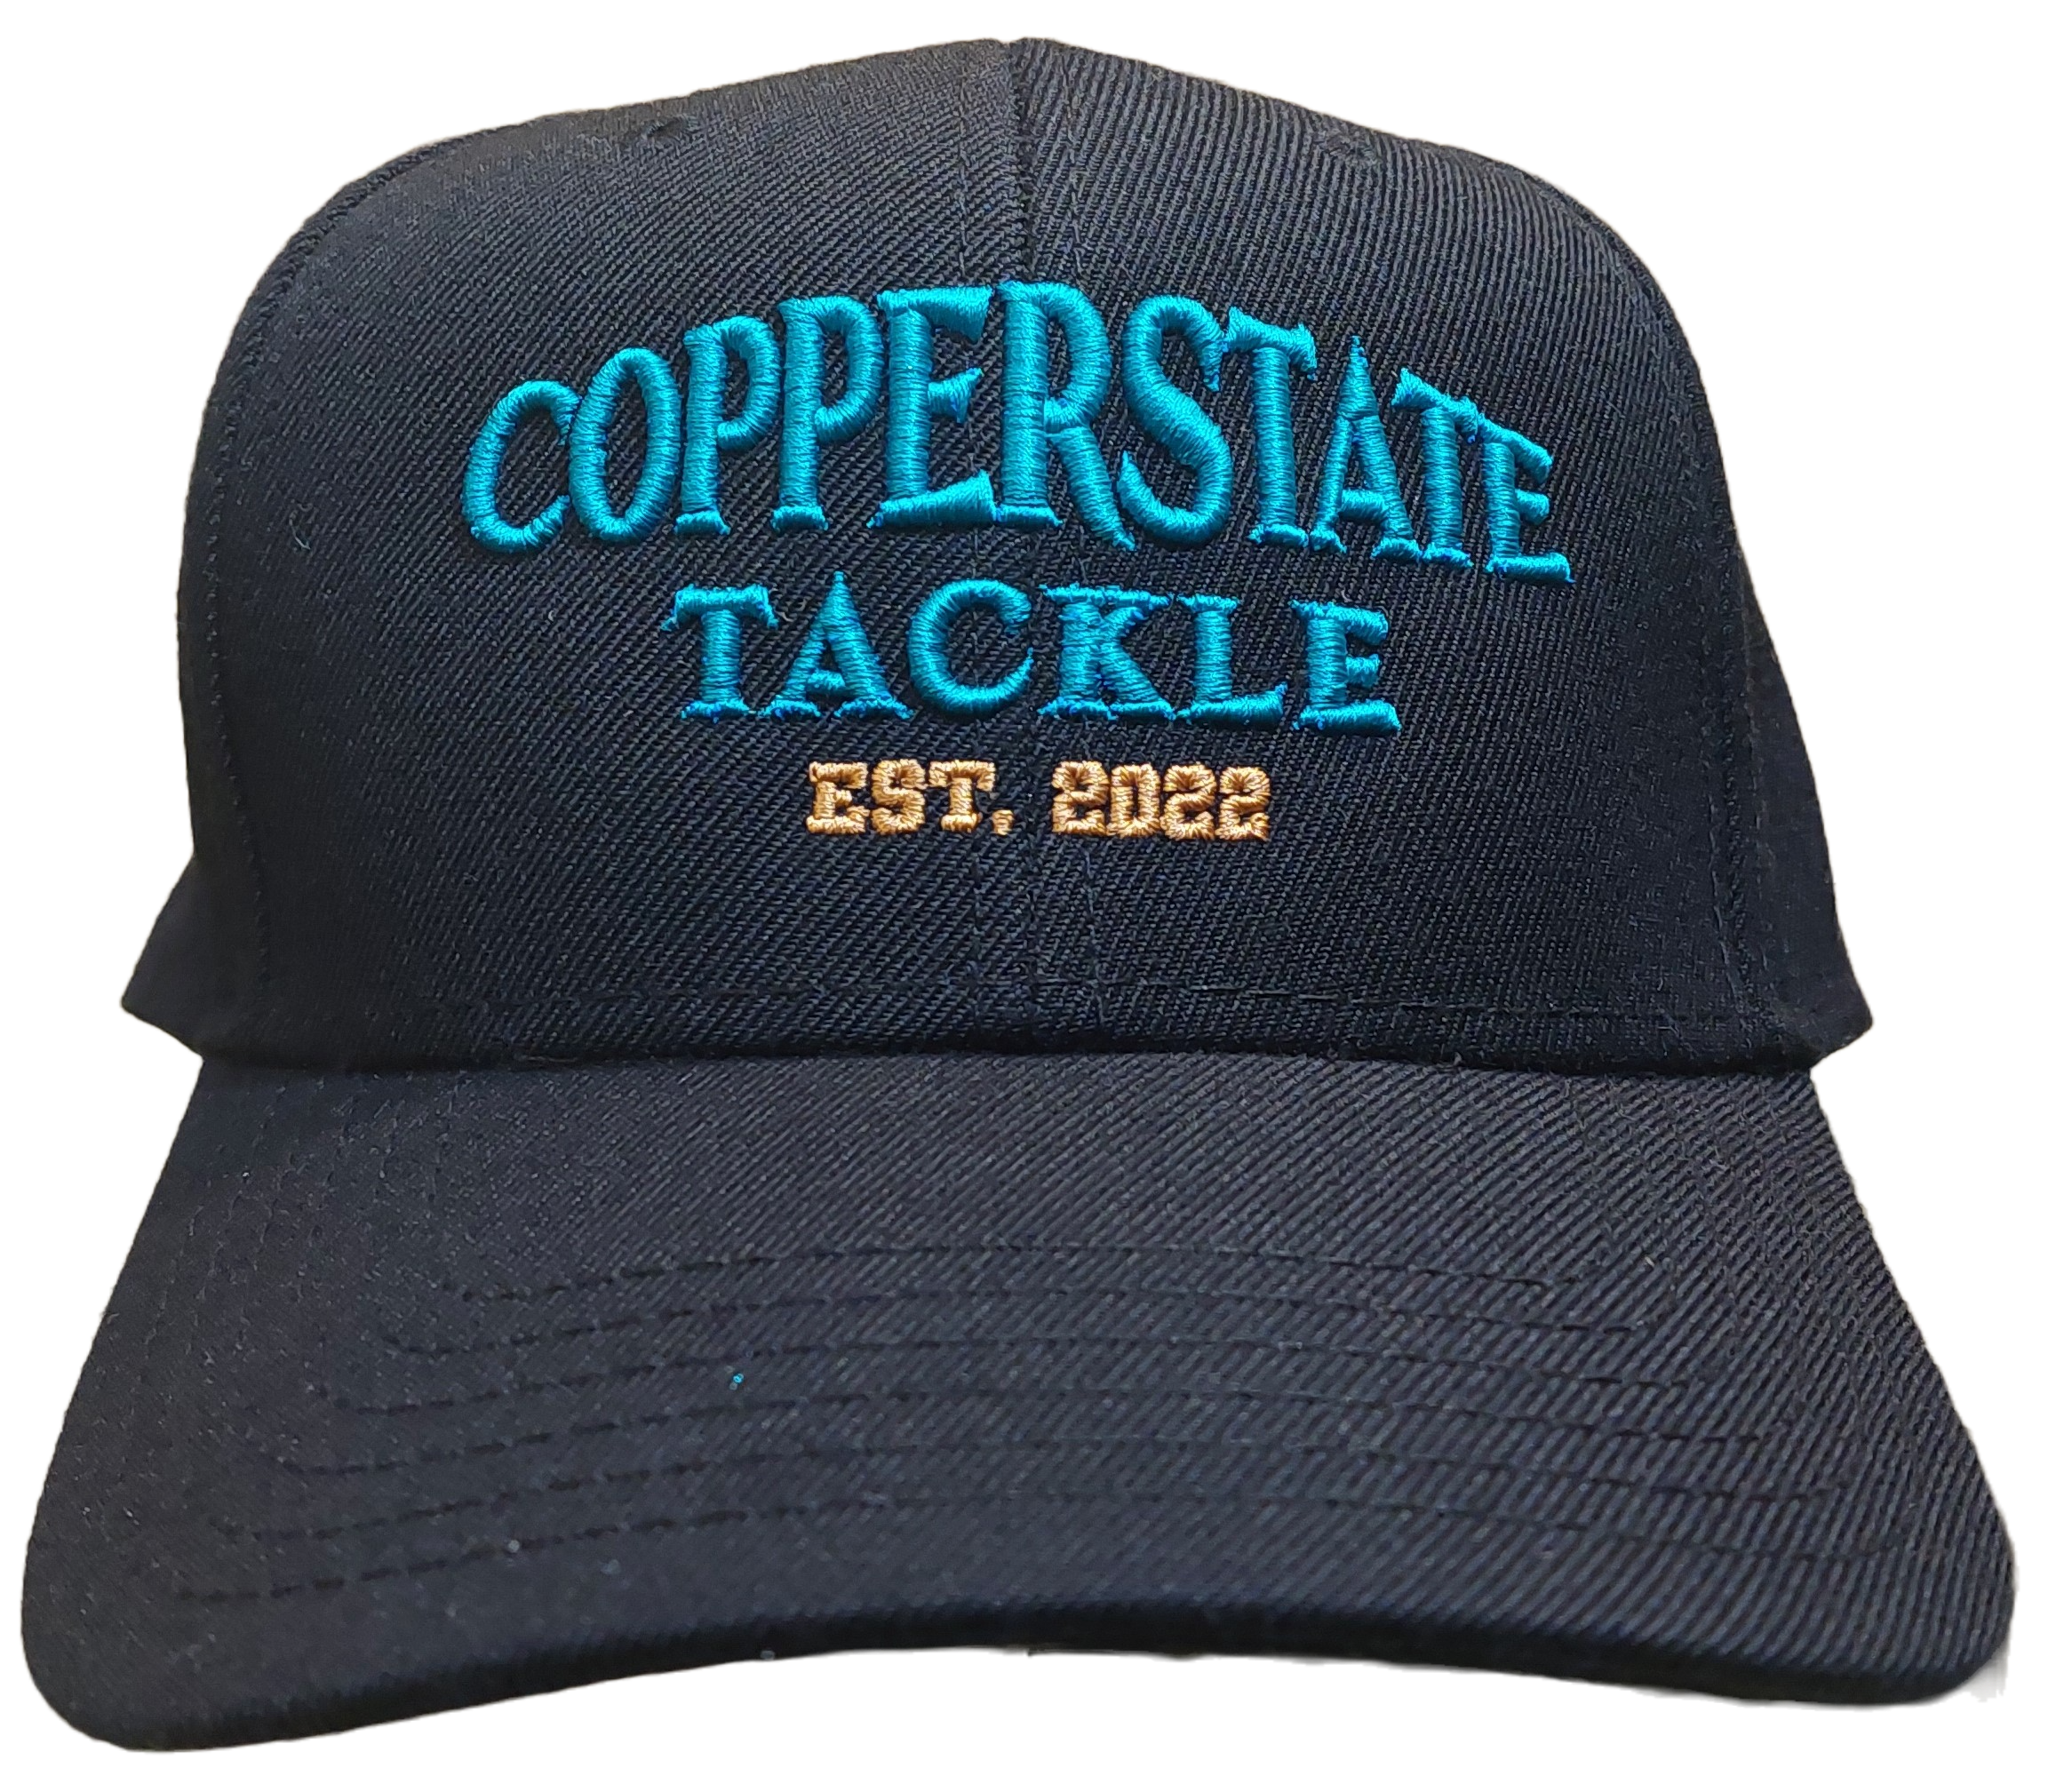 COPPERSTATE TACKLE ICAST ARIZONA EDITION HATS - 0